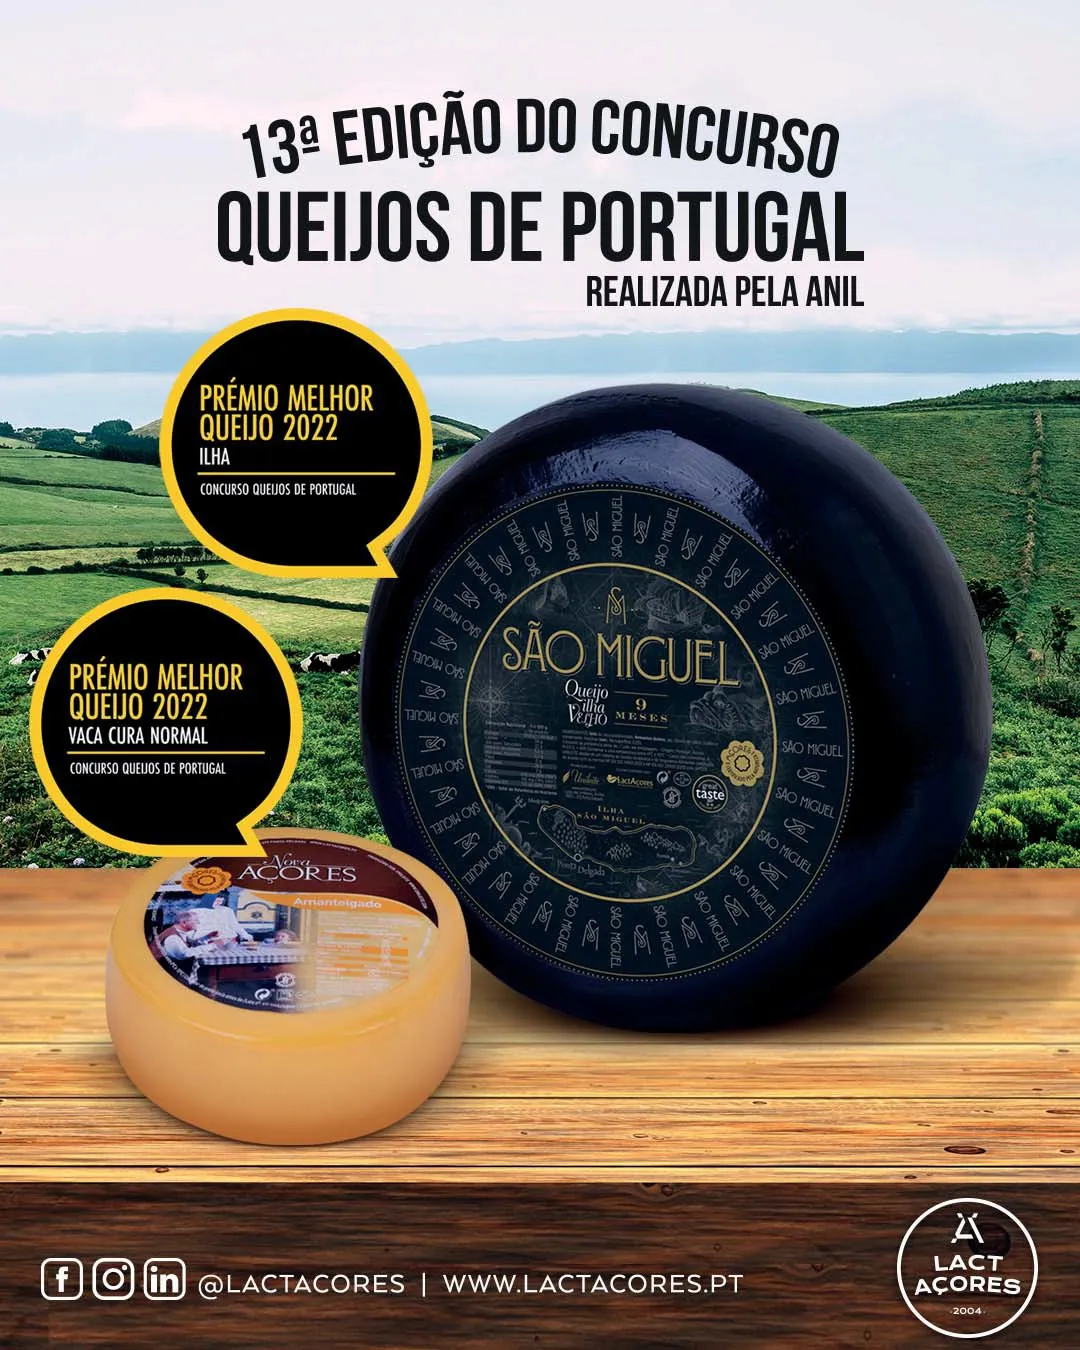 São Miguel Island Cheese 9M and Nova Açores soft cheese elected best cheese of Portugal 2022